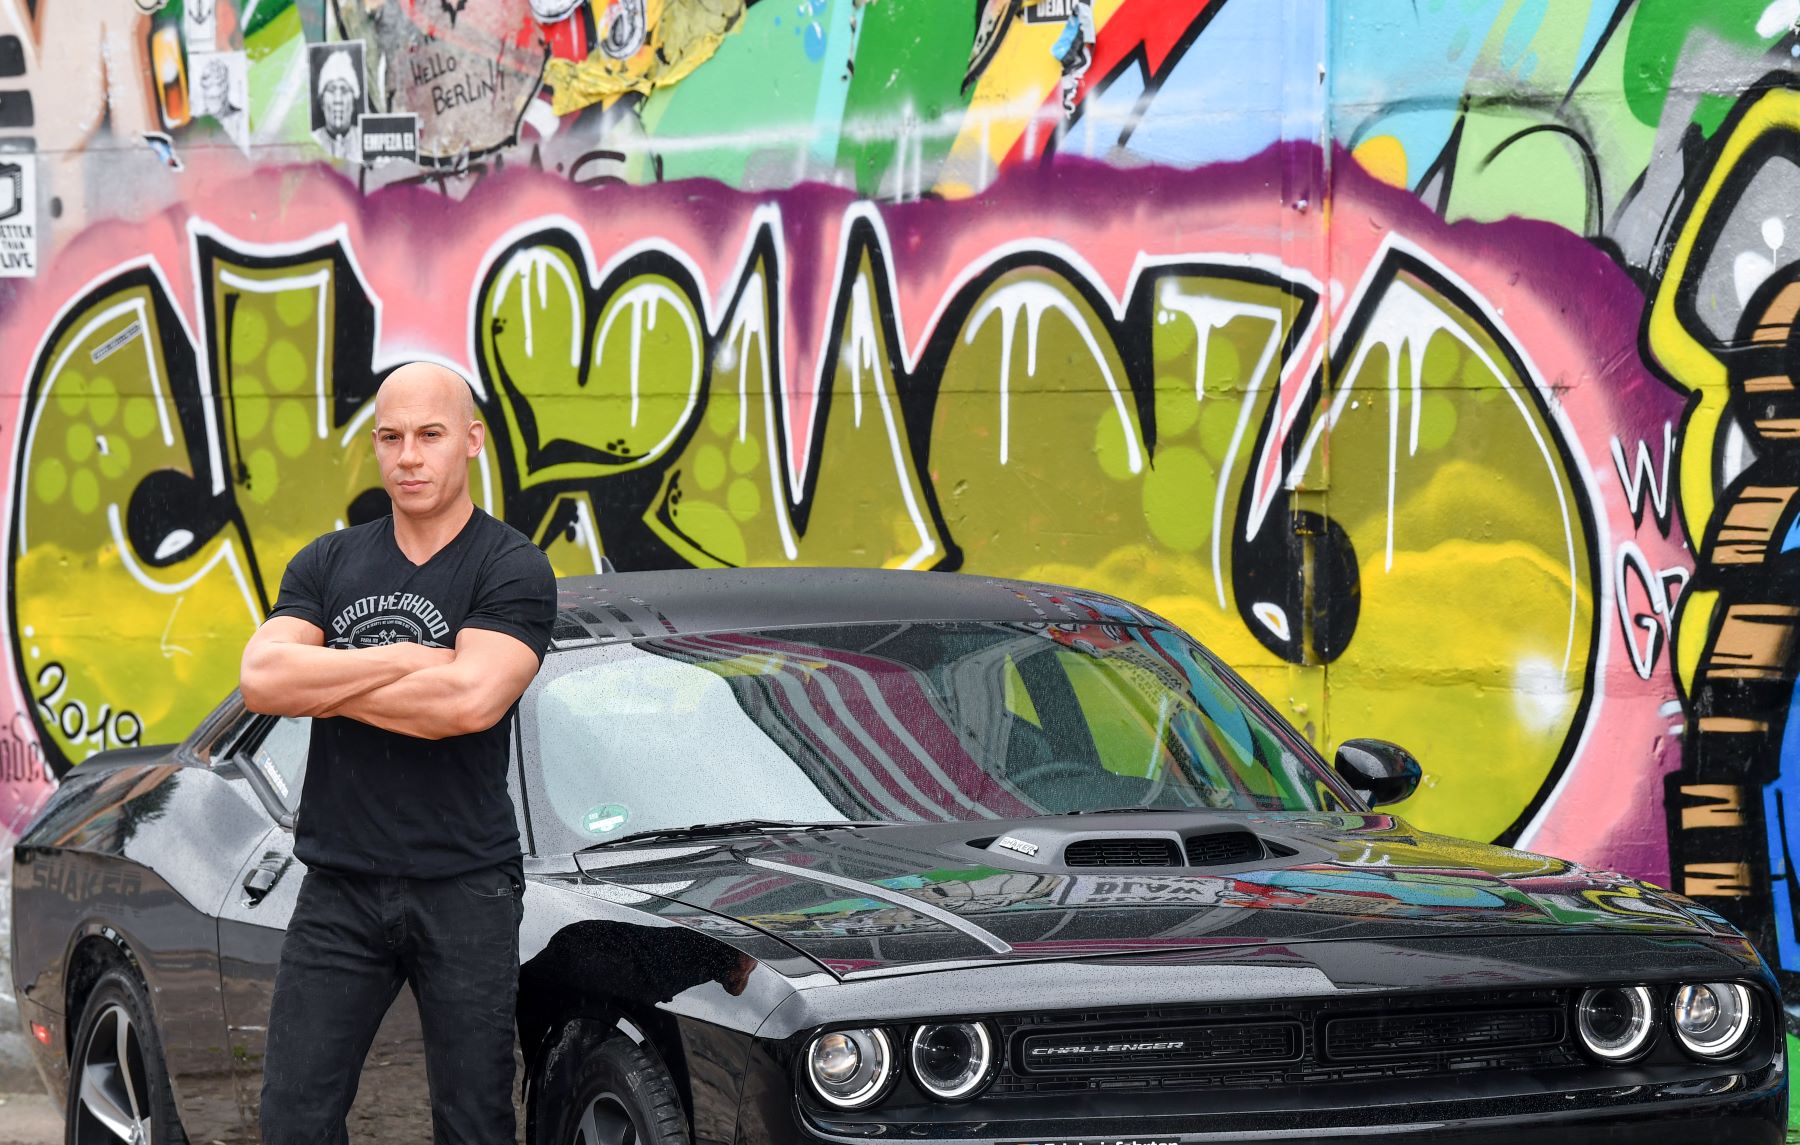 A wax Vin Diesel with his 'Fast & Furious' Dodge Challenger muscle car seen at Madame Tussauds in Berlin, Germany